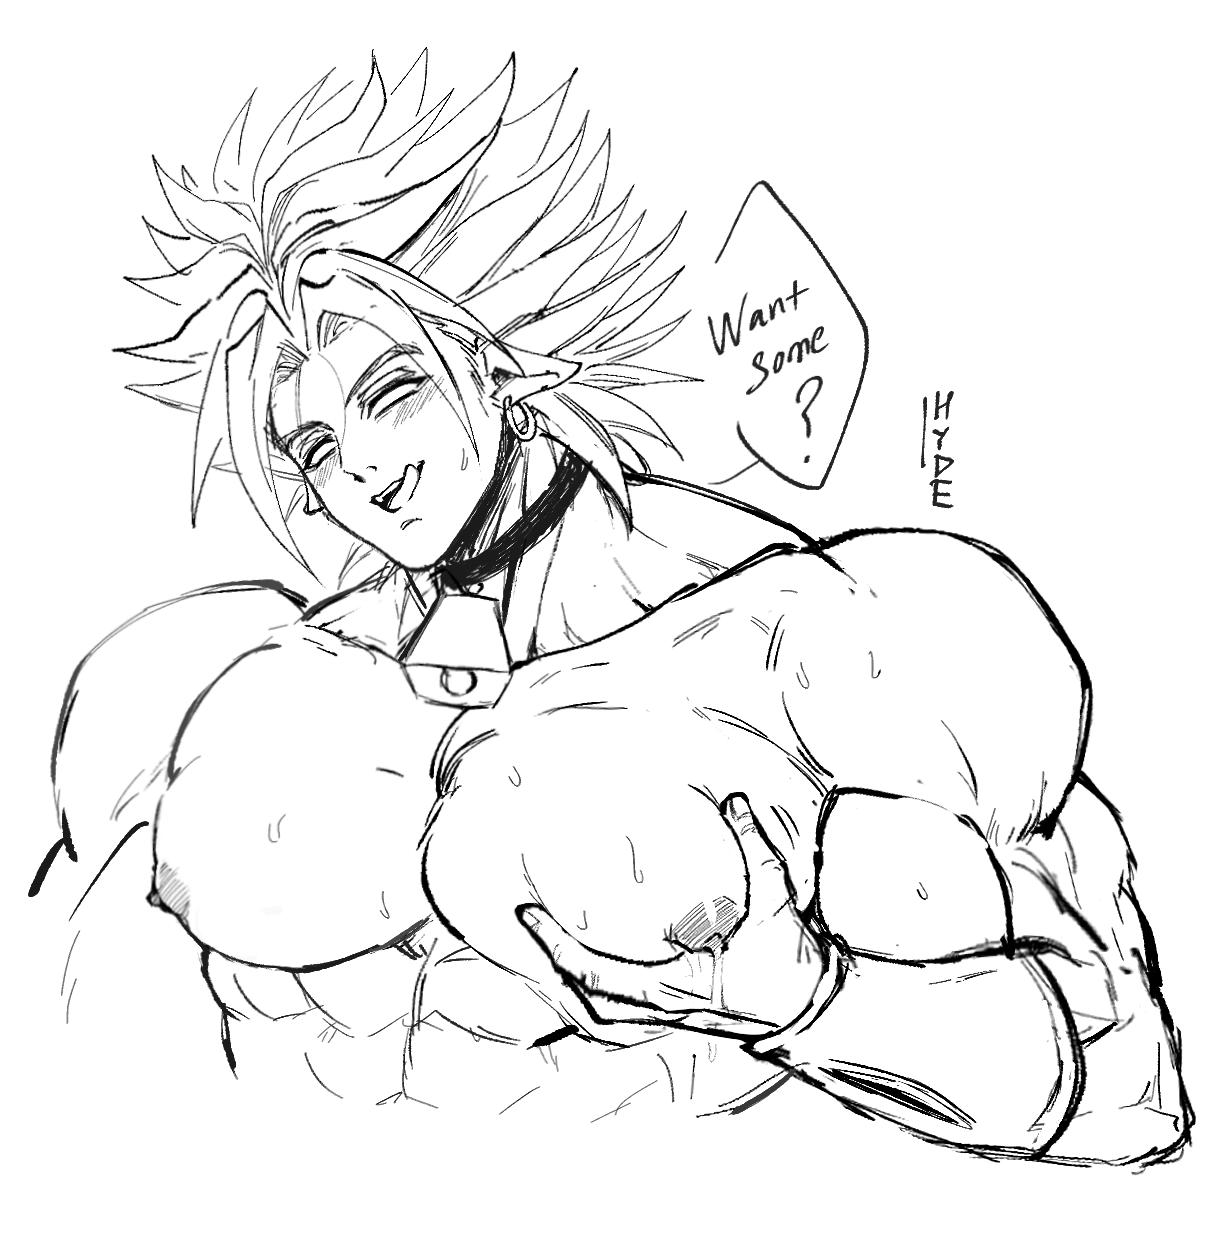 Cow broly 19